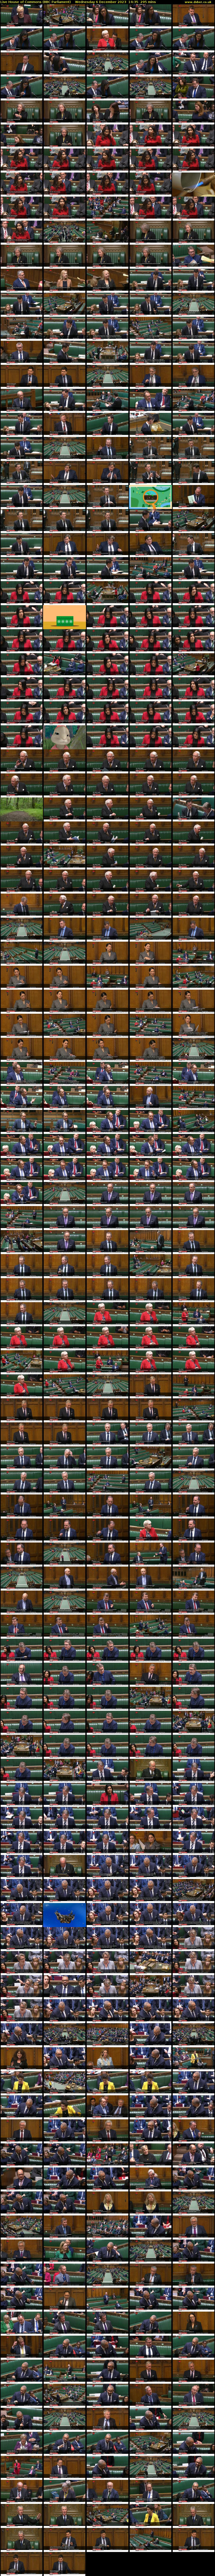 Live House of Commons (BBC Parliament) Wednesday 6 December 2023 14:35 - 19:30